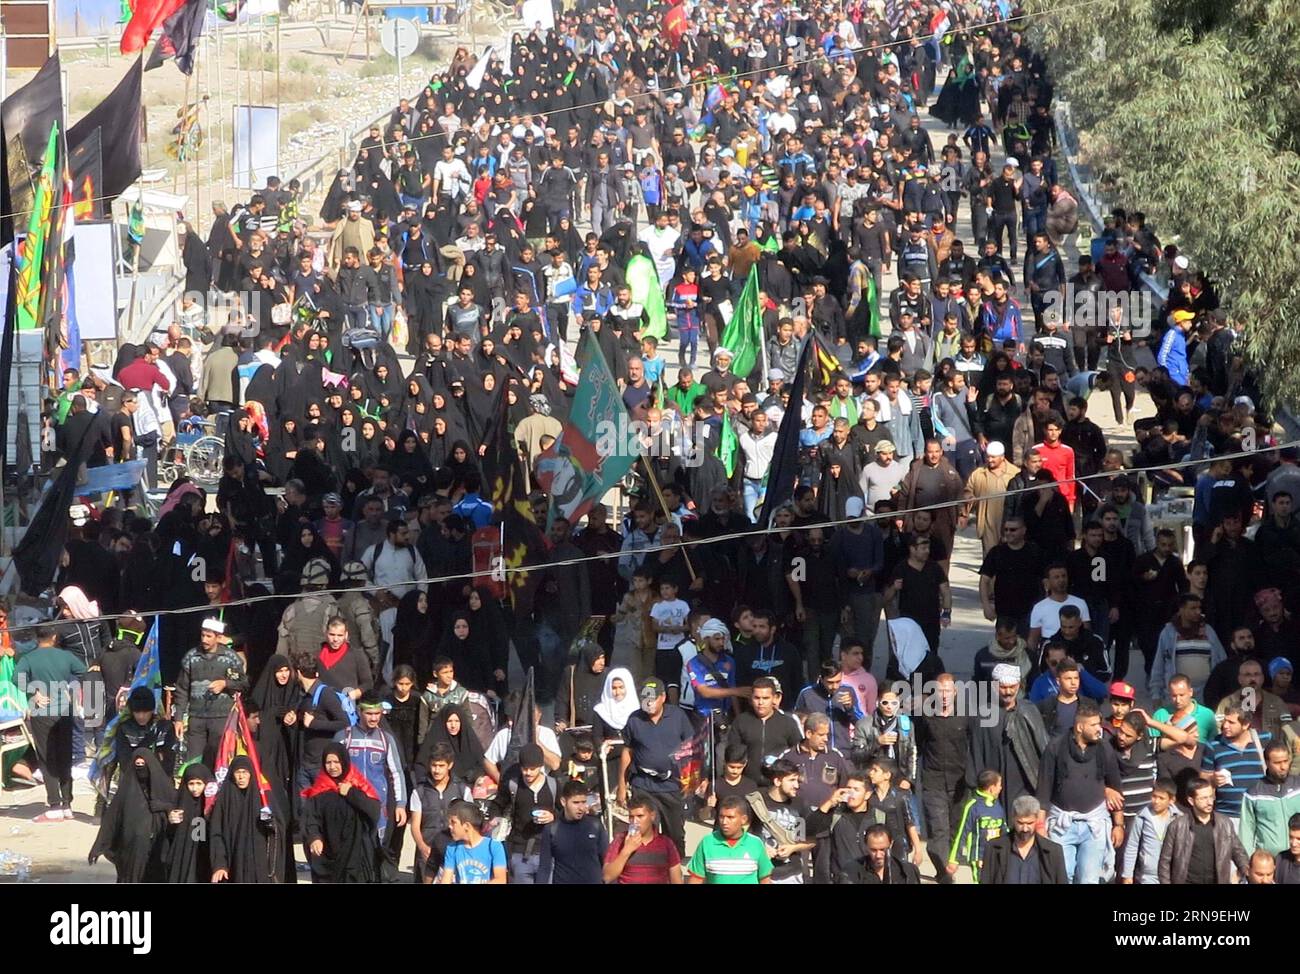 (151201) -- BAGHDAD, Dec. 1, 2015 -- Millions of Shiite Muslim pilgrims walk to the Iraqi shrine city of Karbala for the climax of annual Arbaeen mourning rituals in Baghdad, Iraq, Dec. 1, 2015.) IRAQ-BAGHDAD-IMAM HUSSEIN-COMMEMORATION KhalilxDawood PUBLICATIONxNOTxINxCHN   151201 Baghdad DEC 1 2015 Millions of Shiite Muslim PilgrimS Walk to The Iraqi Shrine City of Karbala for The Climax of Annual Arbaeen Mourning Ritual in Baghdad Iraq DEC 1 2015 Iraq Baghdad Imam Hussein Commemoration KhalilxDawood PUBLICATIONxNOTxINxCHN Stock Photo